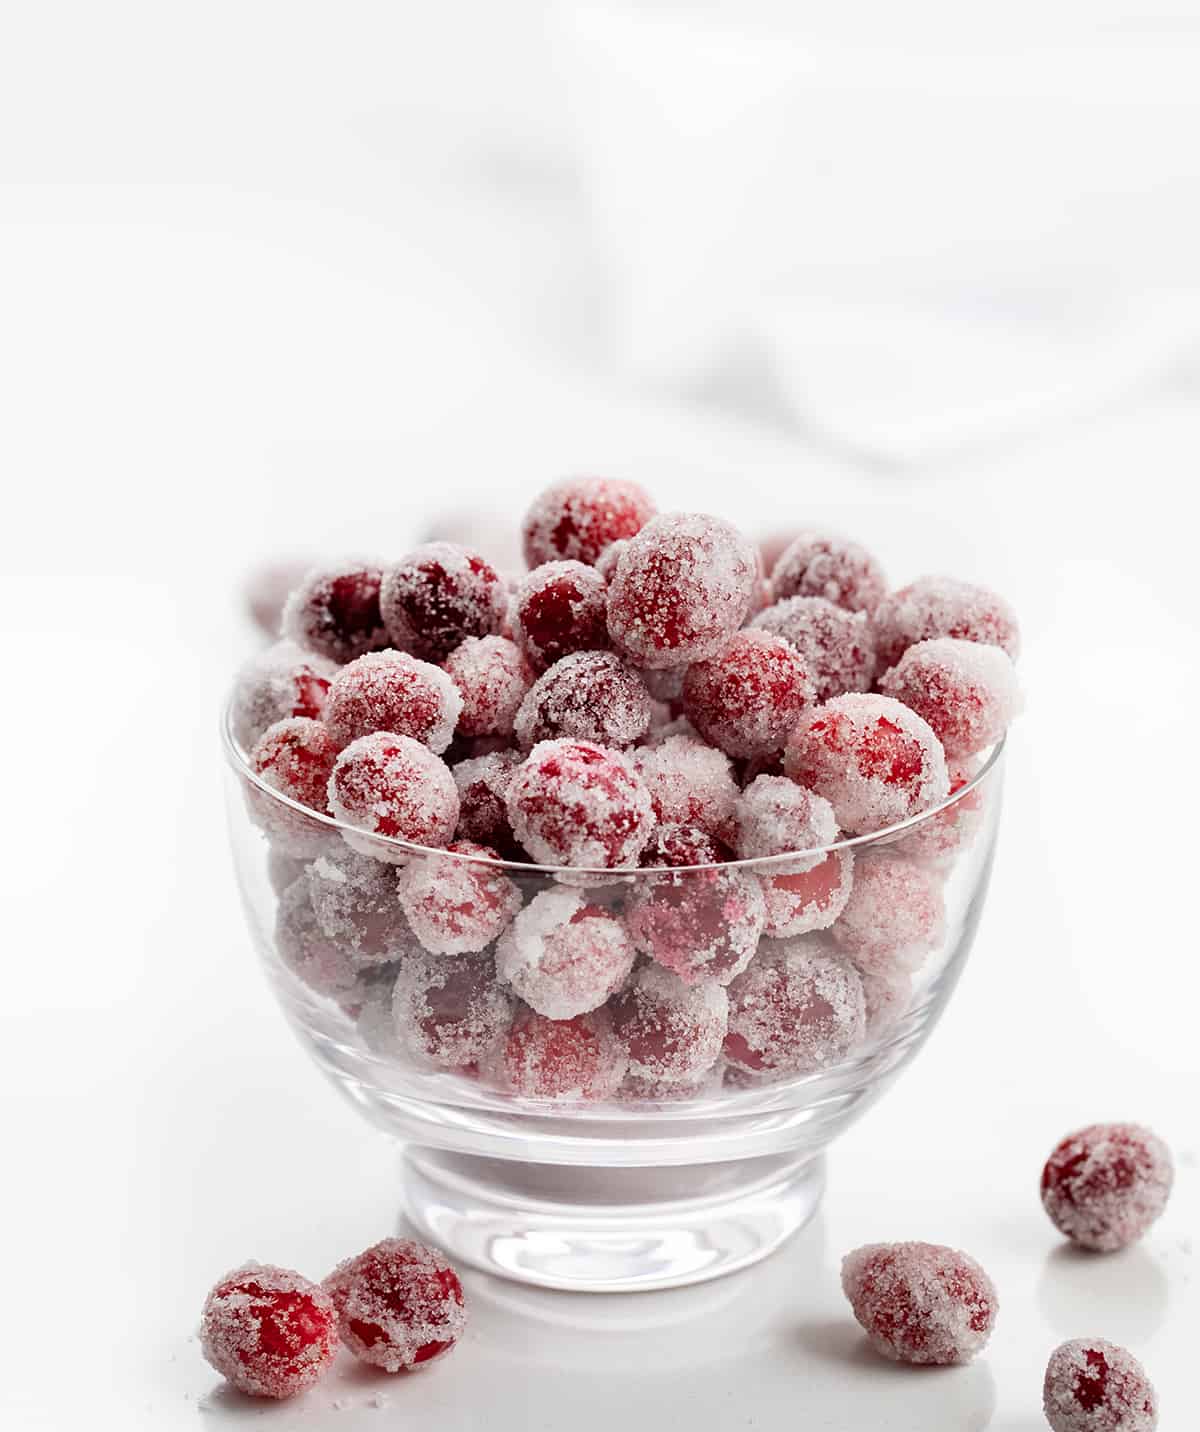 Bowl of Sugared Cranberries on a White Counter.